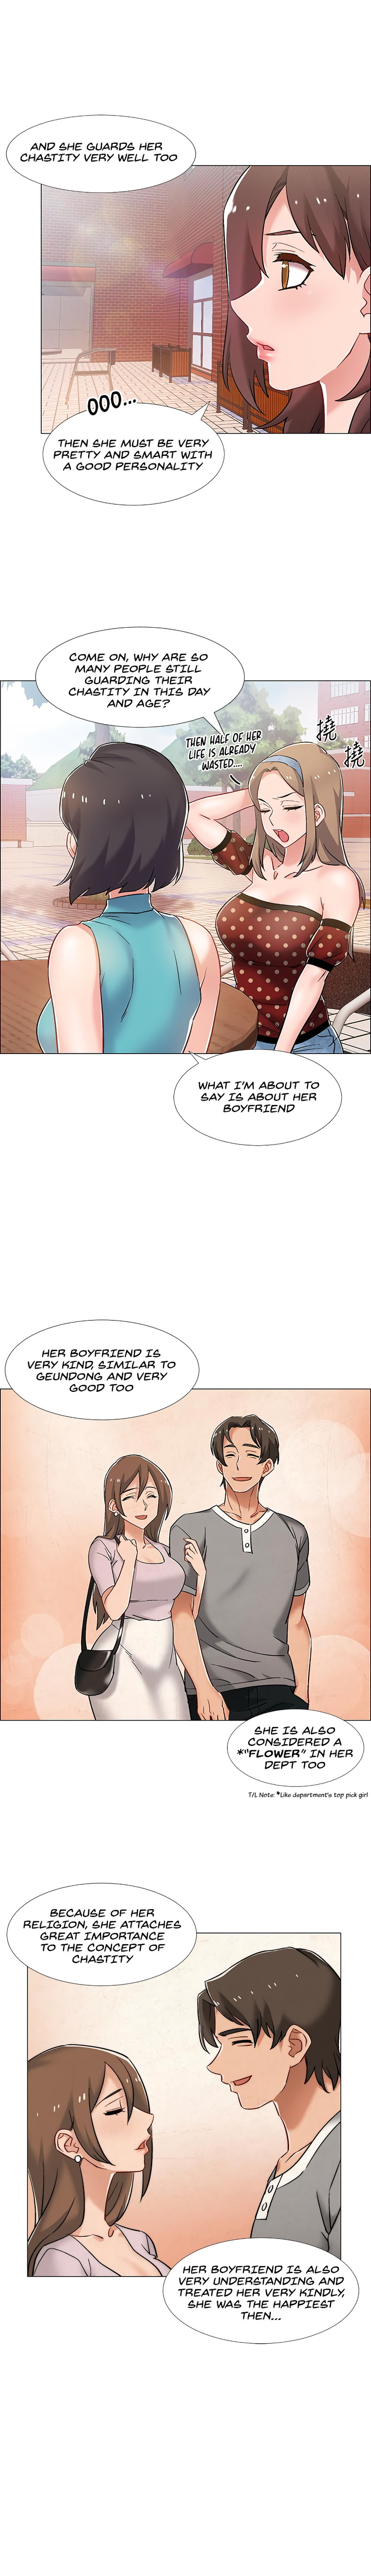 Enlistment Countdown - Chapter 12 Page 13